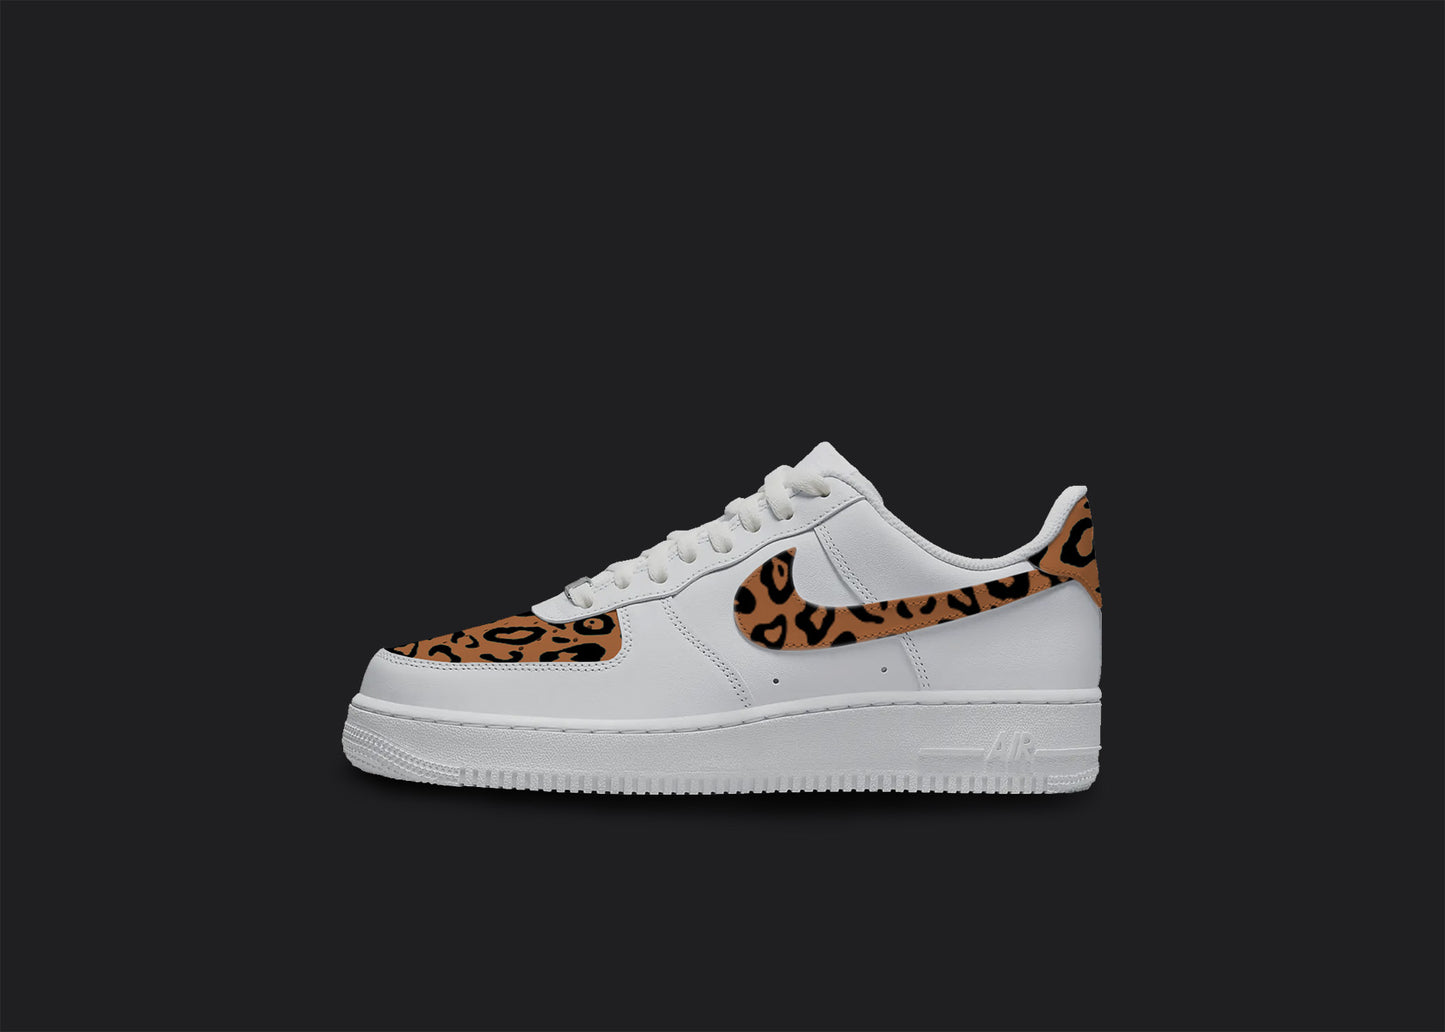 The image is of a Custom Nike Air force 1 sneaker on a blank black background. The white custom sneaker has a Cheetah print in the front and on the nike logo. 